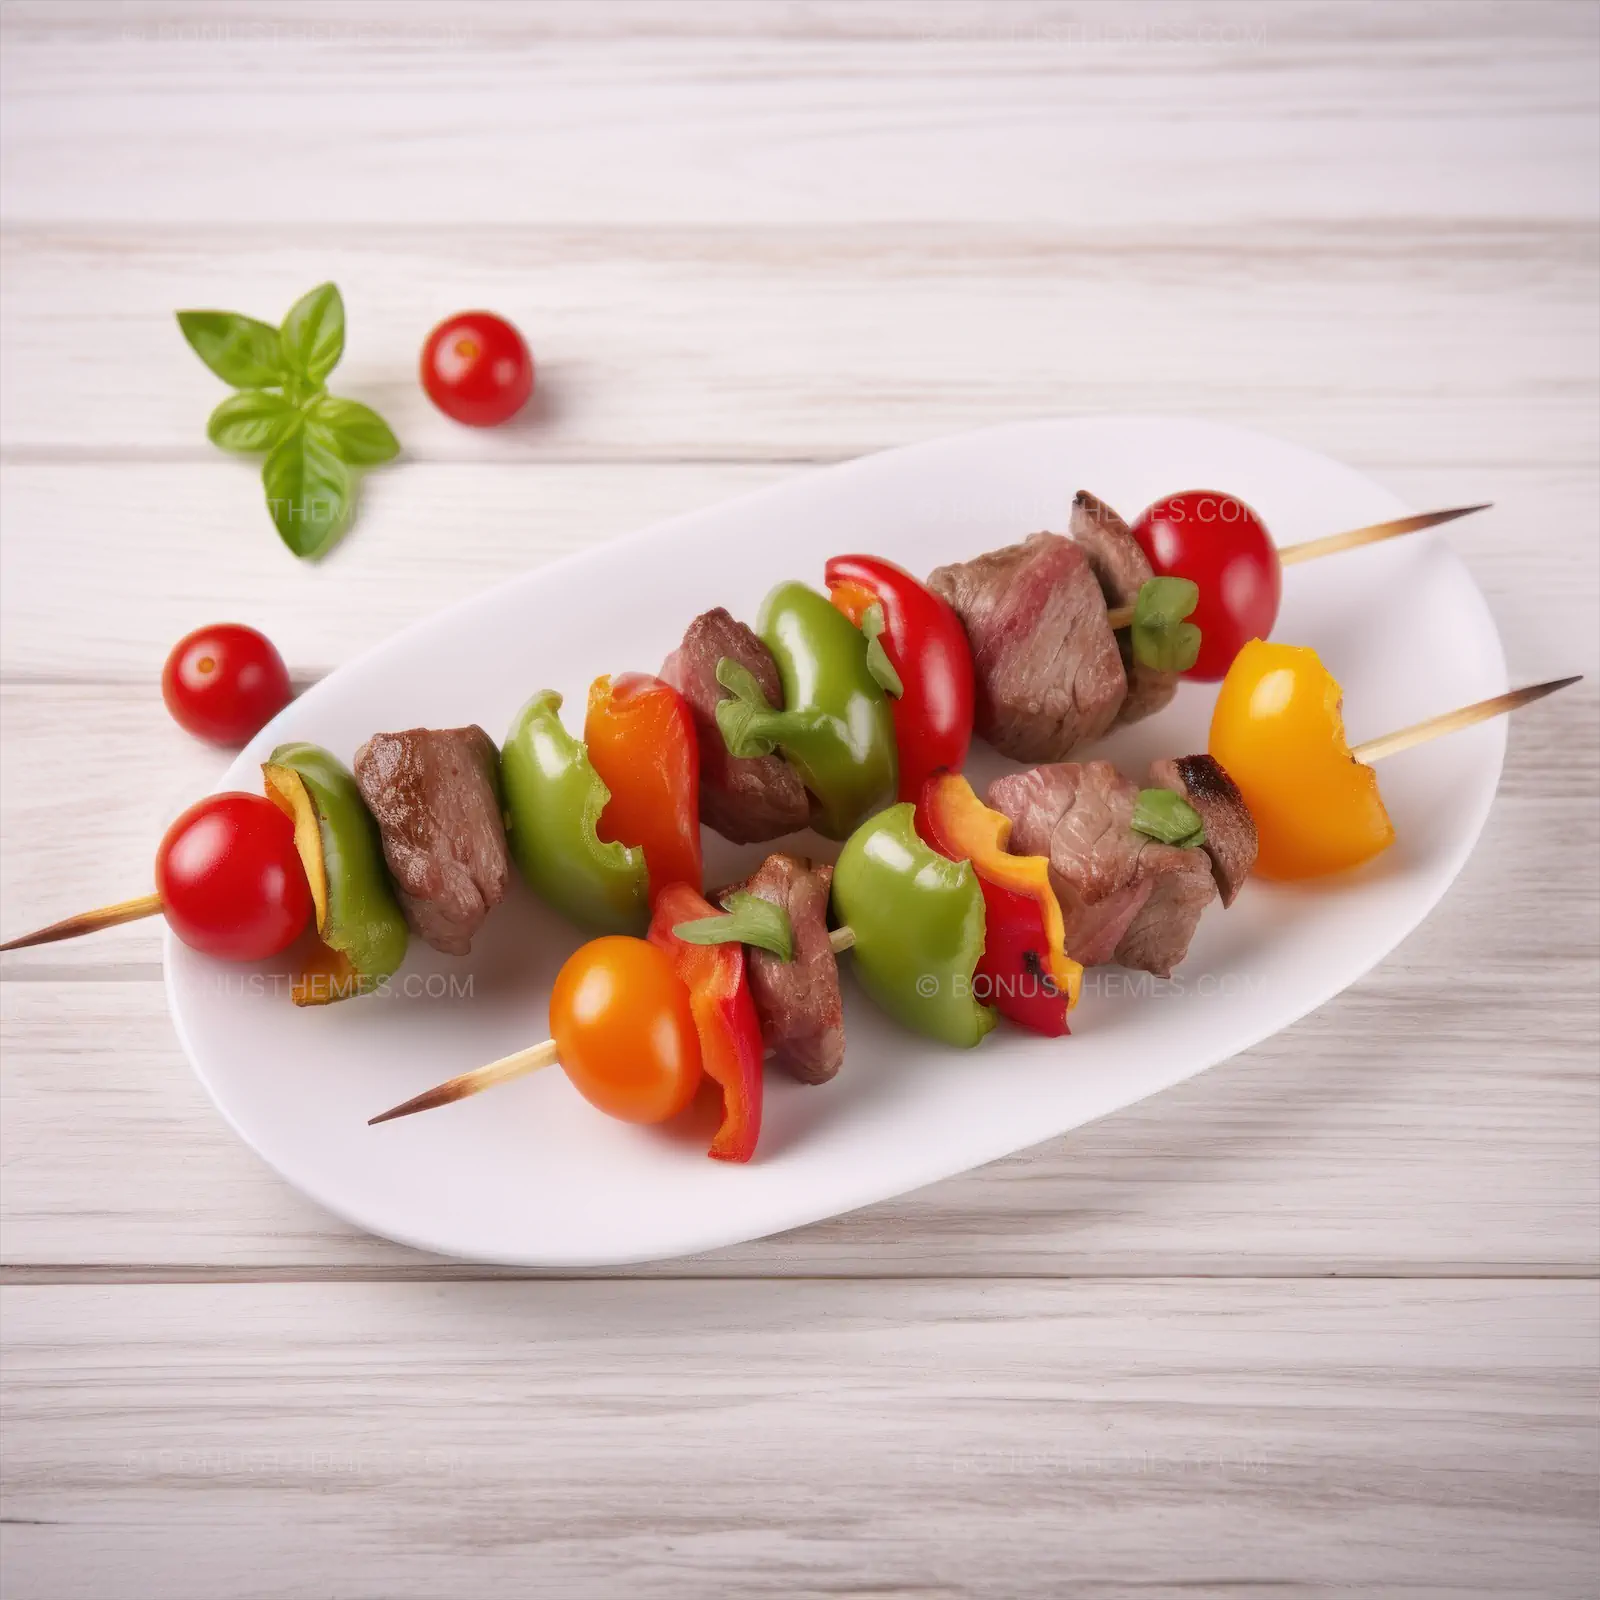 Pork meat skewers with tomatoes and peppers on a light wood background